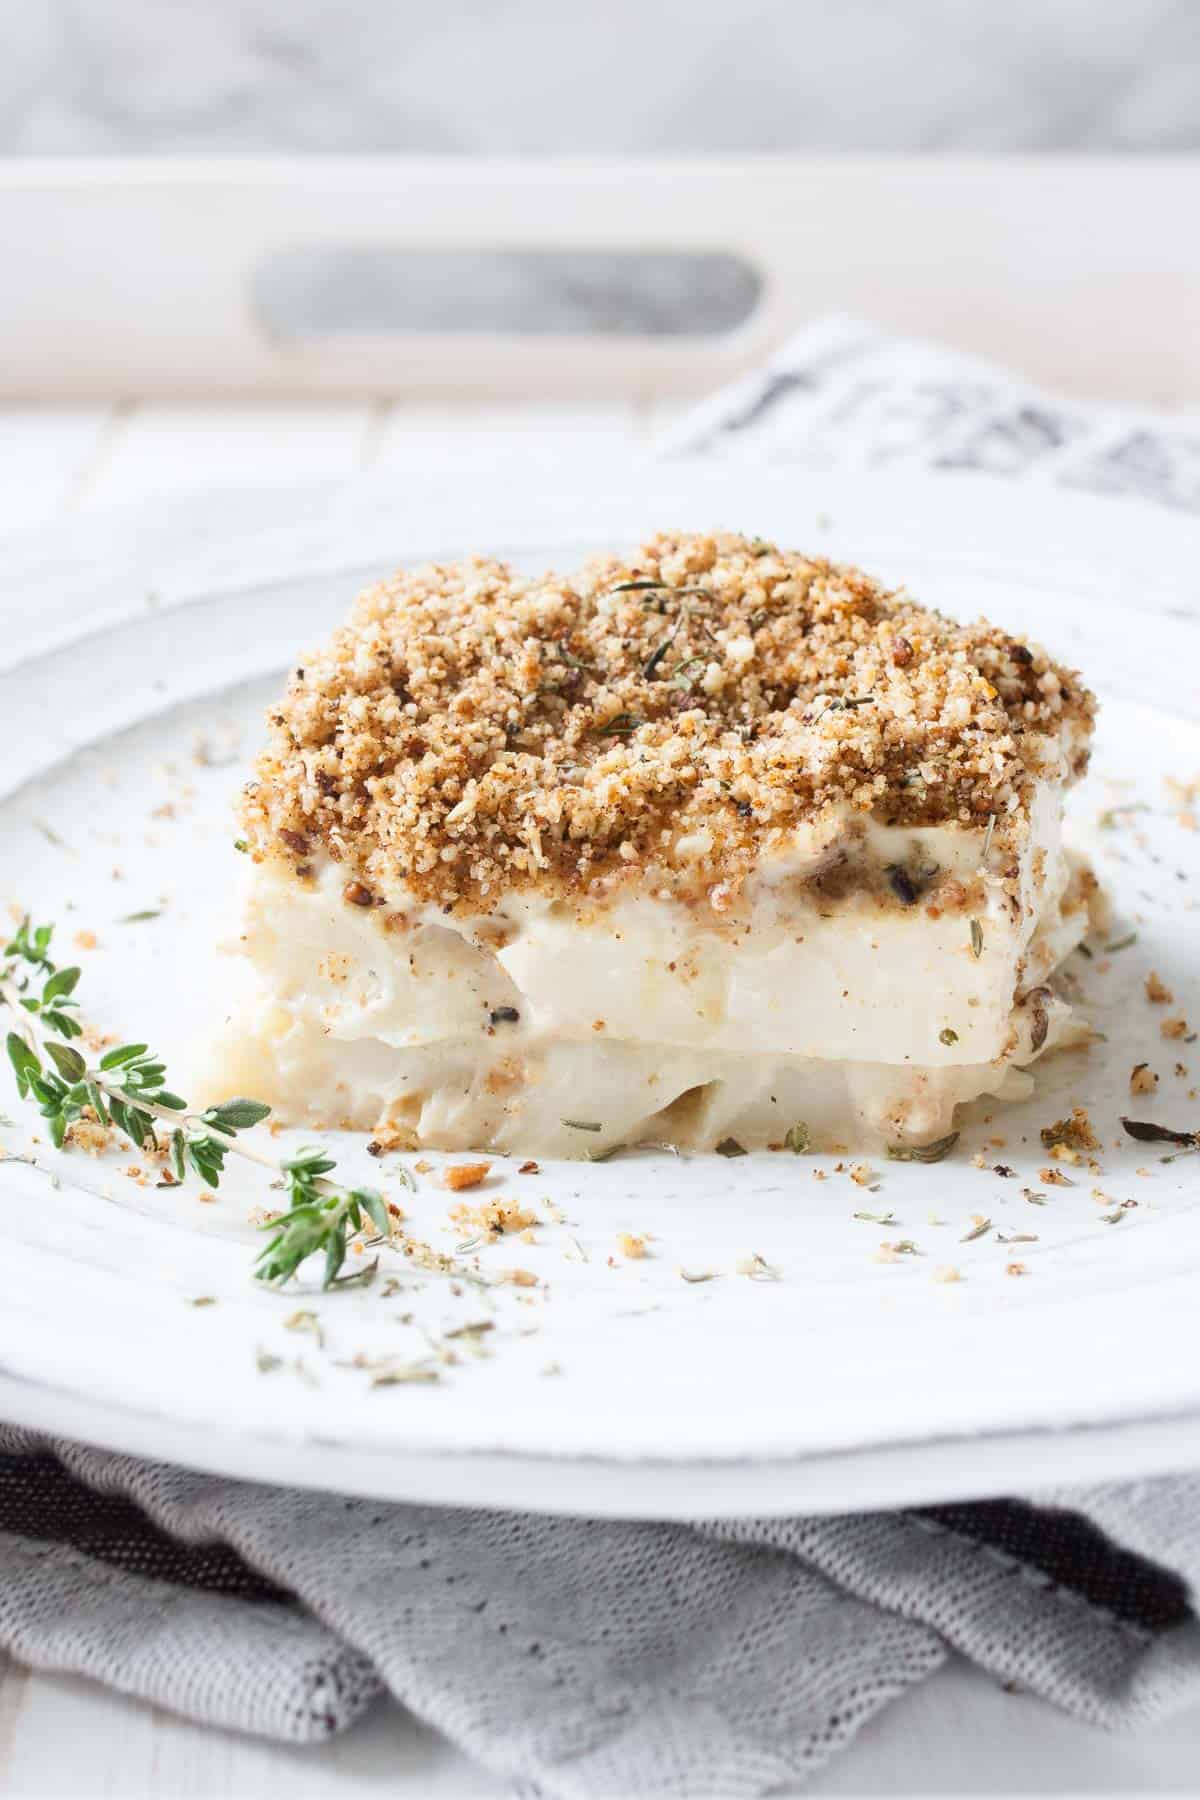 A close up shot of a slice of cauliflower casserole on a plate with a sprig of thyme